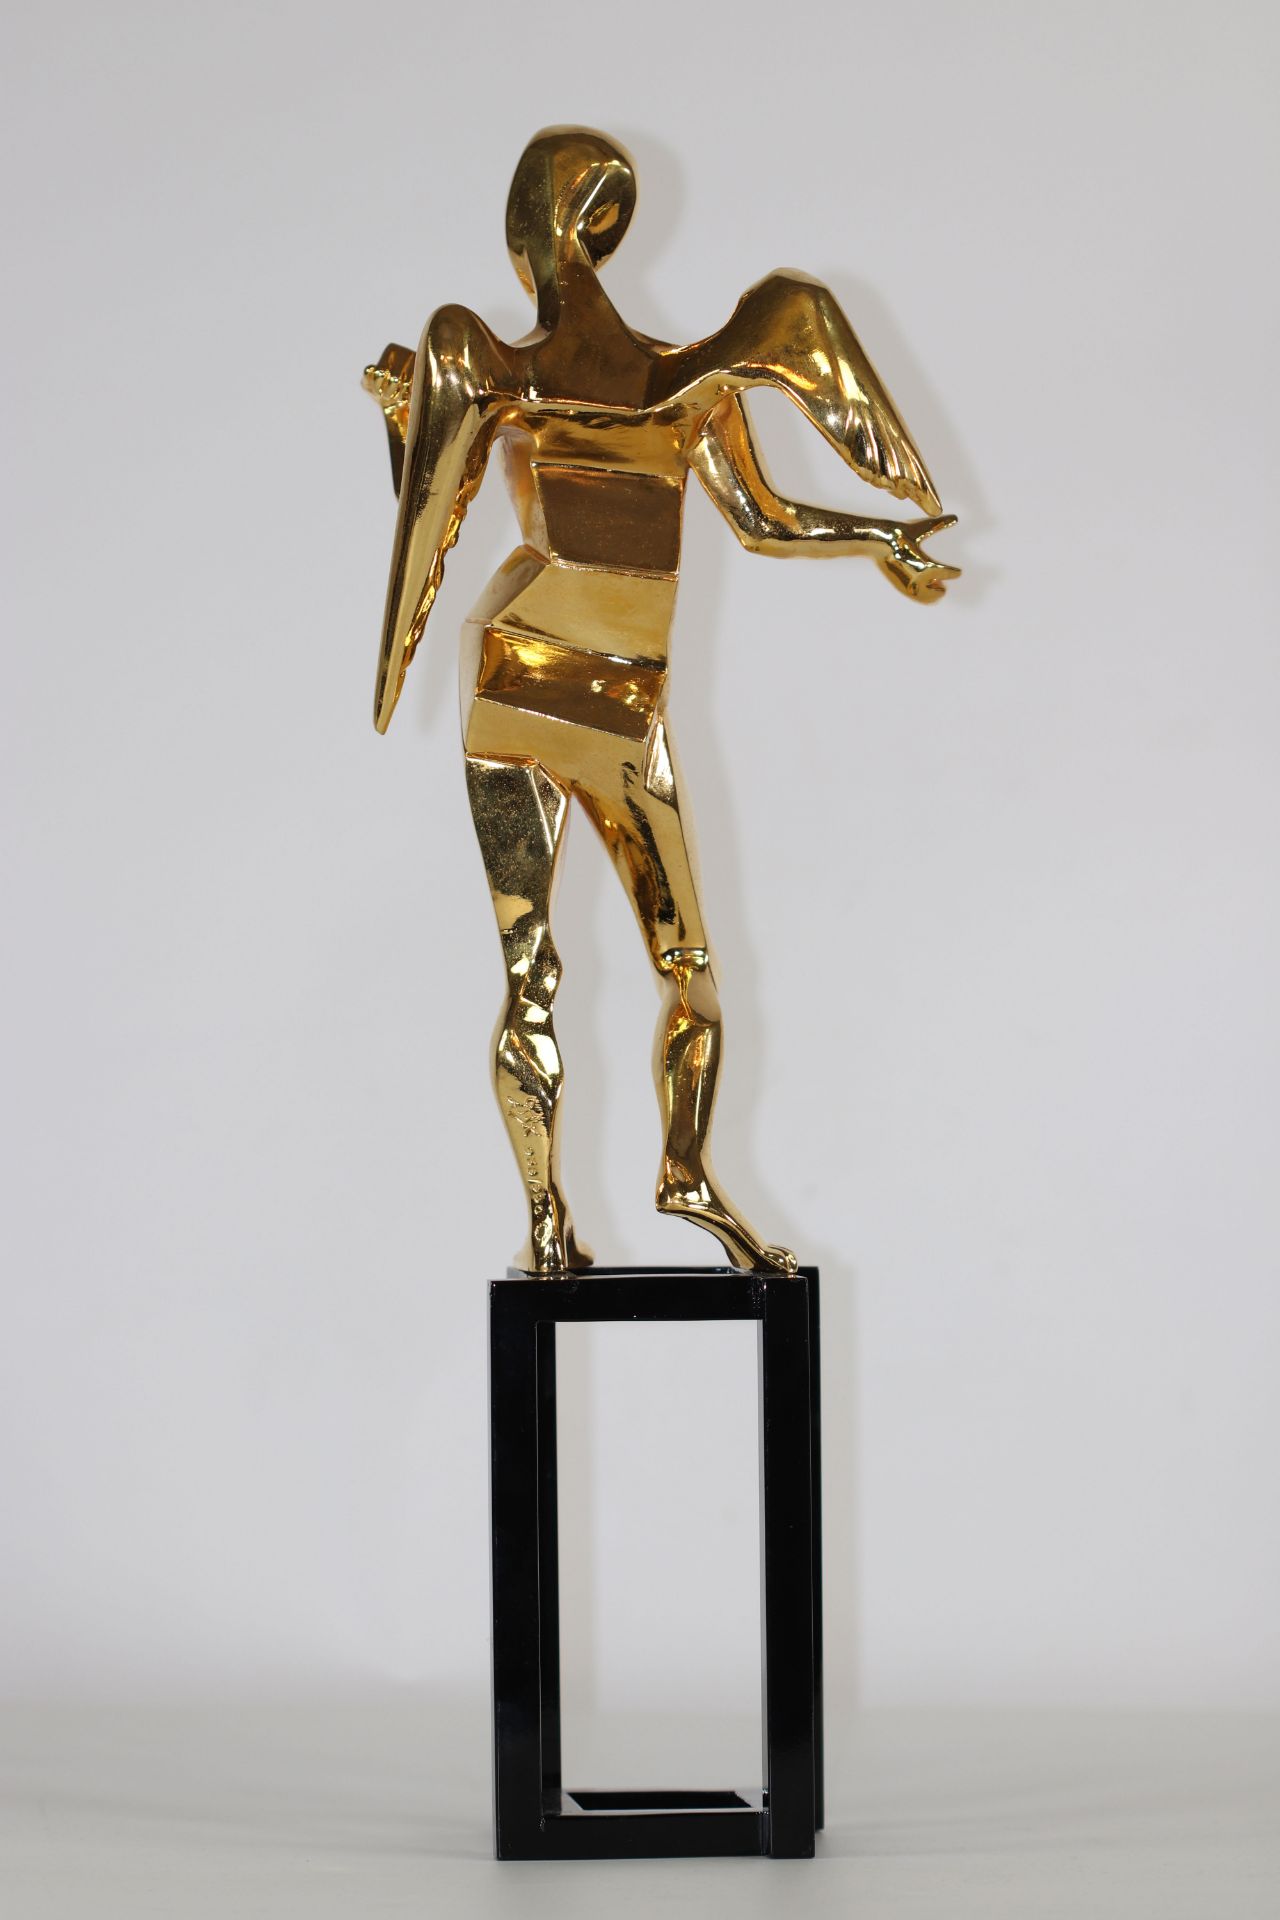 Salvador Dali The Cubist Angel 1983 Bronze gilded with 24 carat fine gold Signed"Dali" Numbered 938/ - Image 4 of 8